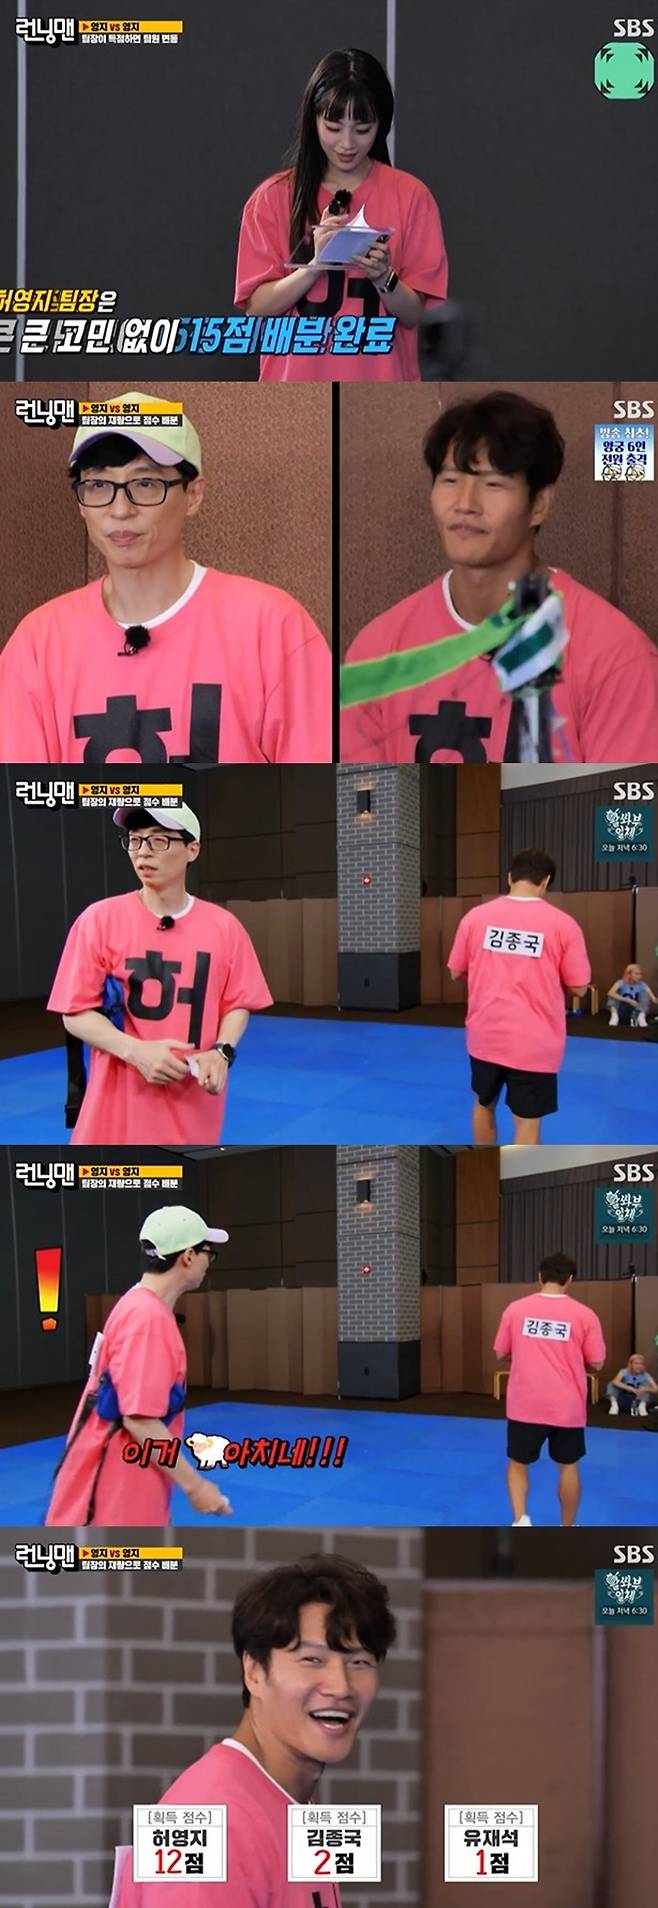 Seoul = = Yoo Jae-Suk Furious to Grand LandsSBS Running Man, which was broadcasted on the afternoon of the 22nd, was decorated with Ghost vs. Ghost Race with guest Lee Young and Heo Young-ji.The team will be played against Lee Young and Heo Young-ji, and each mission will change. The team leader will score points and distribute them to the team.The first mission was a dance mission, where Lee Young suppressed the steamer with extraordinary energy, and even danced new songs such as Ohmy Girl and Espa, which made the team admire One.Lee Young gave just one point to Yoo Jae-Suk and Kim Jong-kook after the win.Round two is a volleyball match; Yoo Jae-Suk and Kim Jong-kook, who left Lee Young to become the Heo Young-ji team, coordinated the game with a breath.Lee Young surprised the team One because he was surprisingly unmotivated, even Jeon So-min, who was put into the team, lost the team with his shit-spring performance.Heo Young-ji won and gave Yoo Jae-Suk one point and Kim Jong-kook two.Yoo Jae-Suk, who received the scorecard, laughed at Furious, saying, This is a bitch.